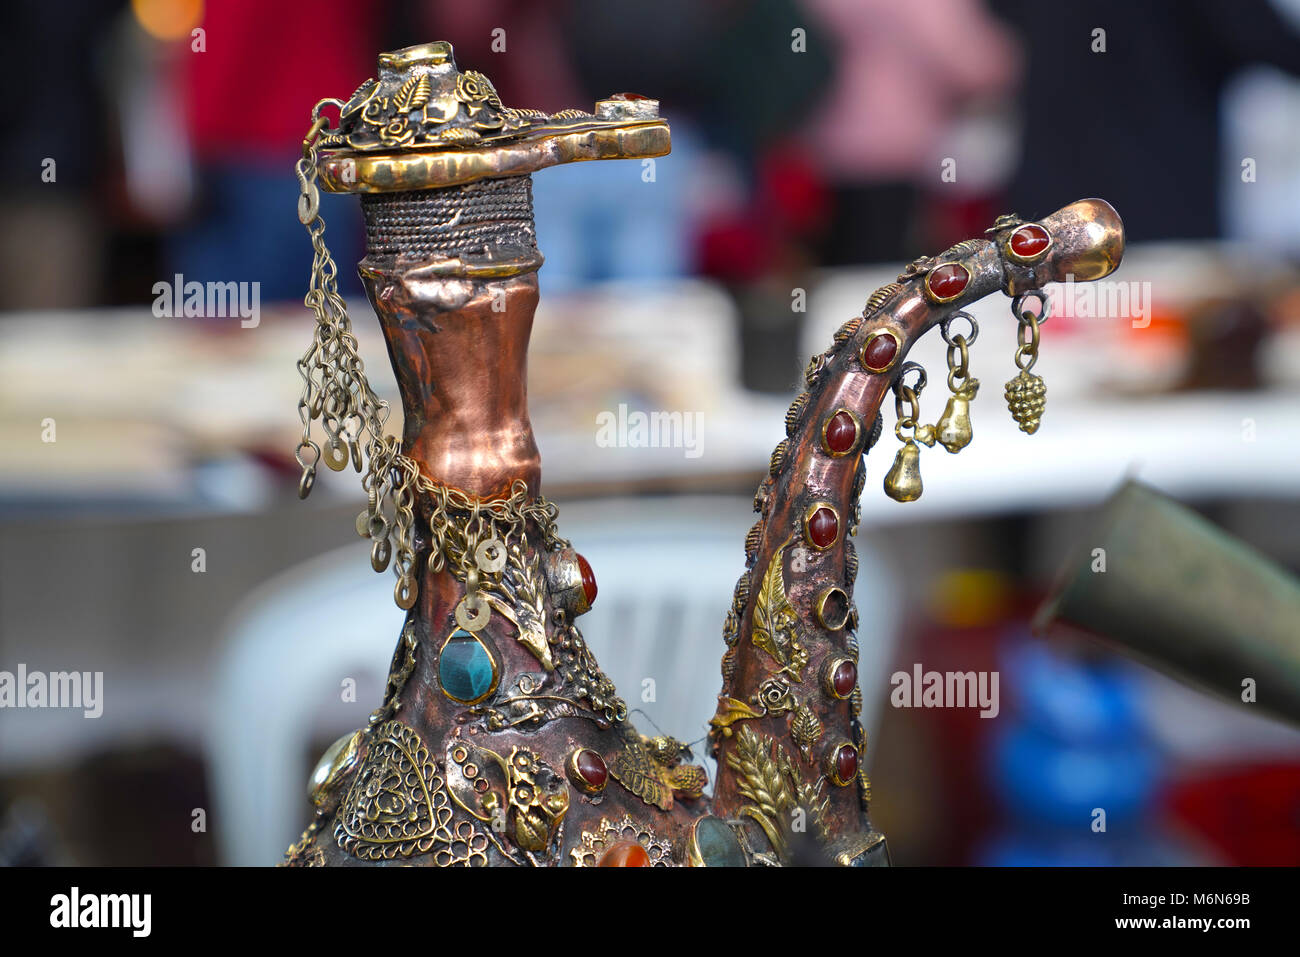 Oriental pitcher decorated with beads and chains Stock Photo